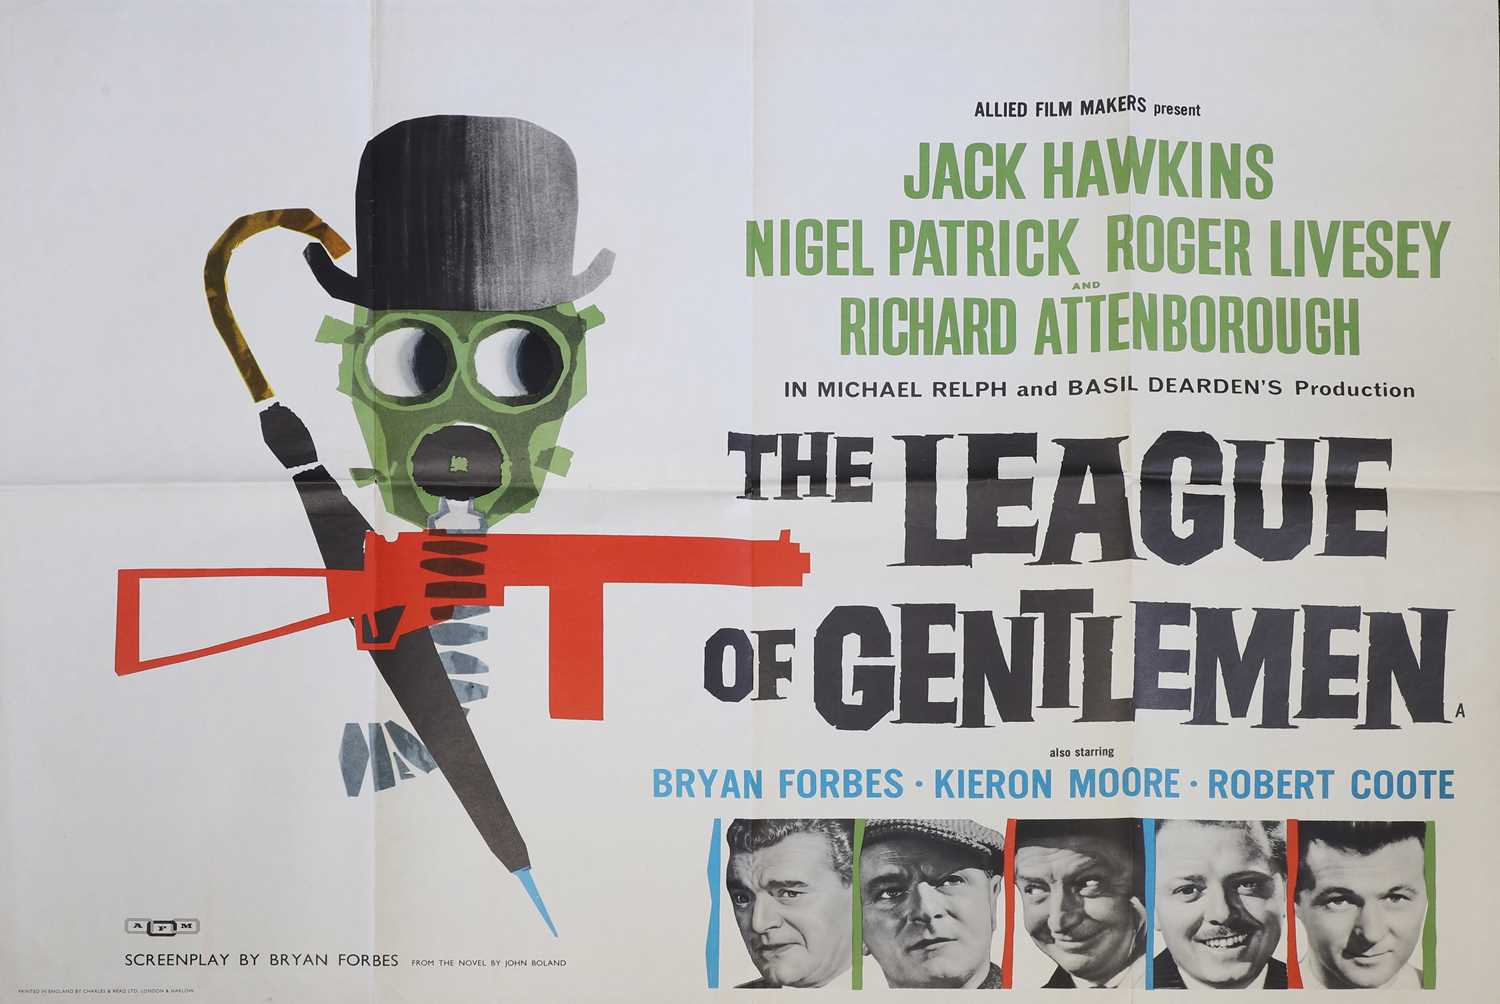 A poster for 'The League of Gentlemen',